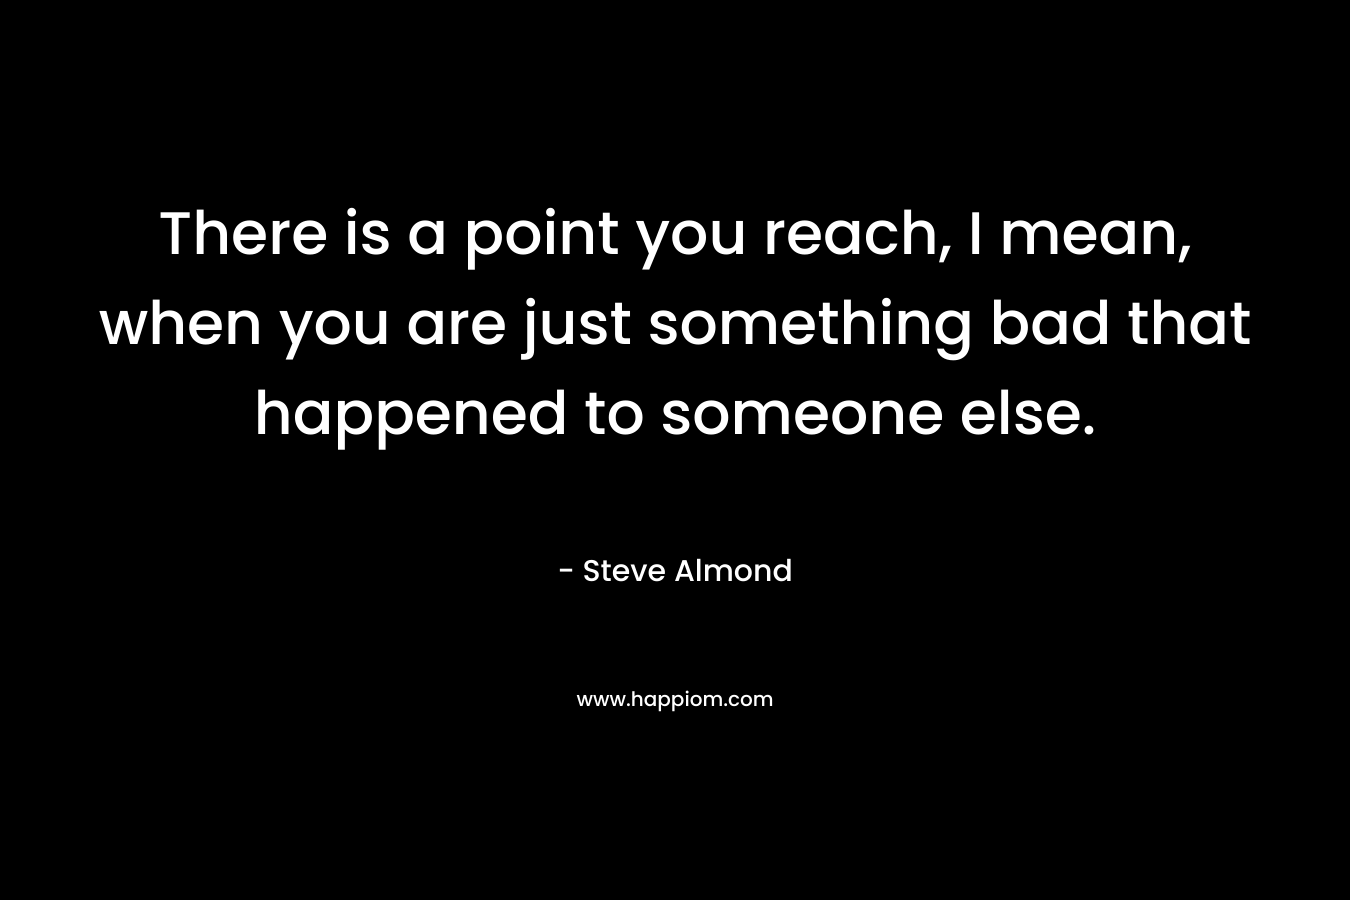 There is a point you reach, I mean, when you are just something bad that happened to someone else. – Steve Almond